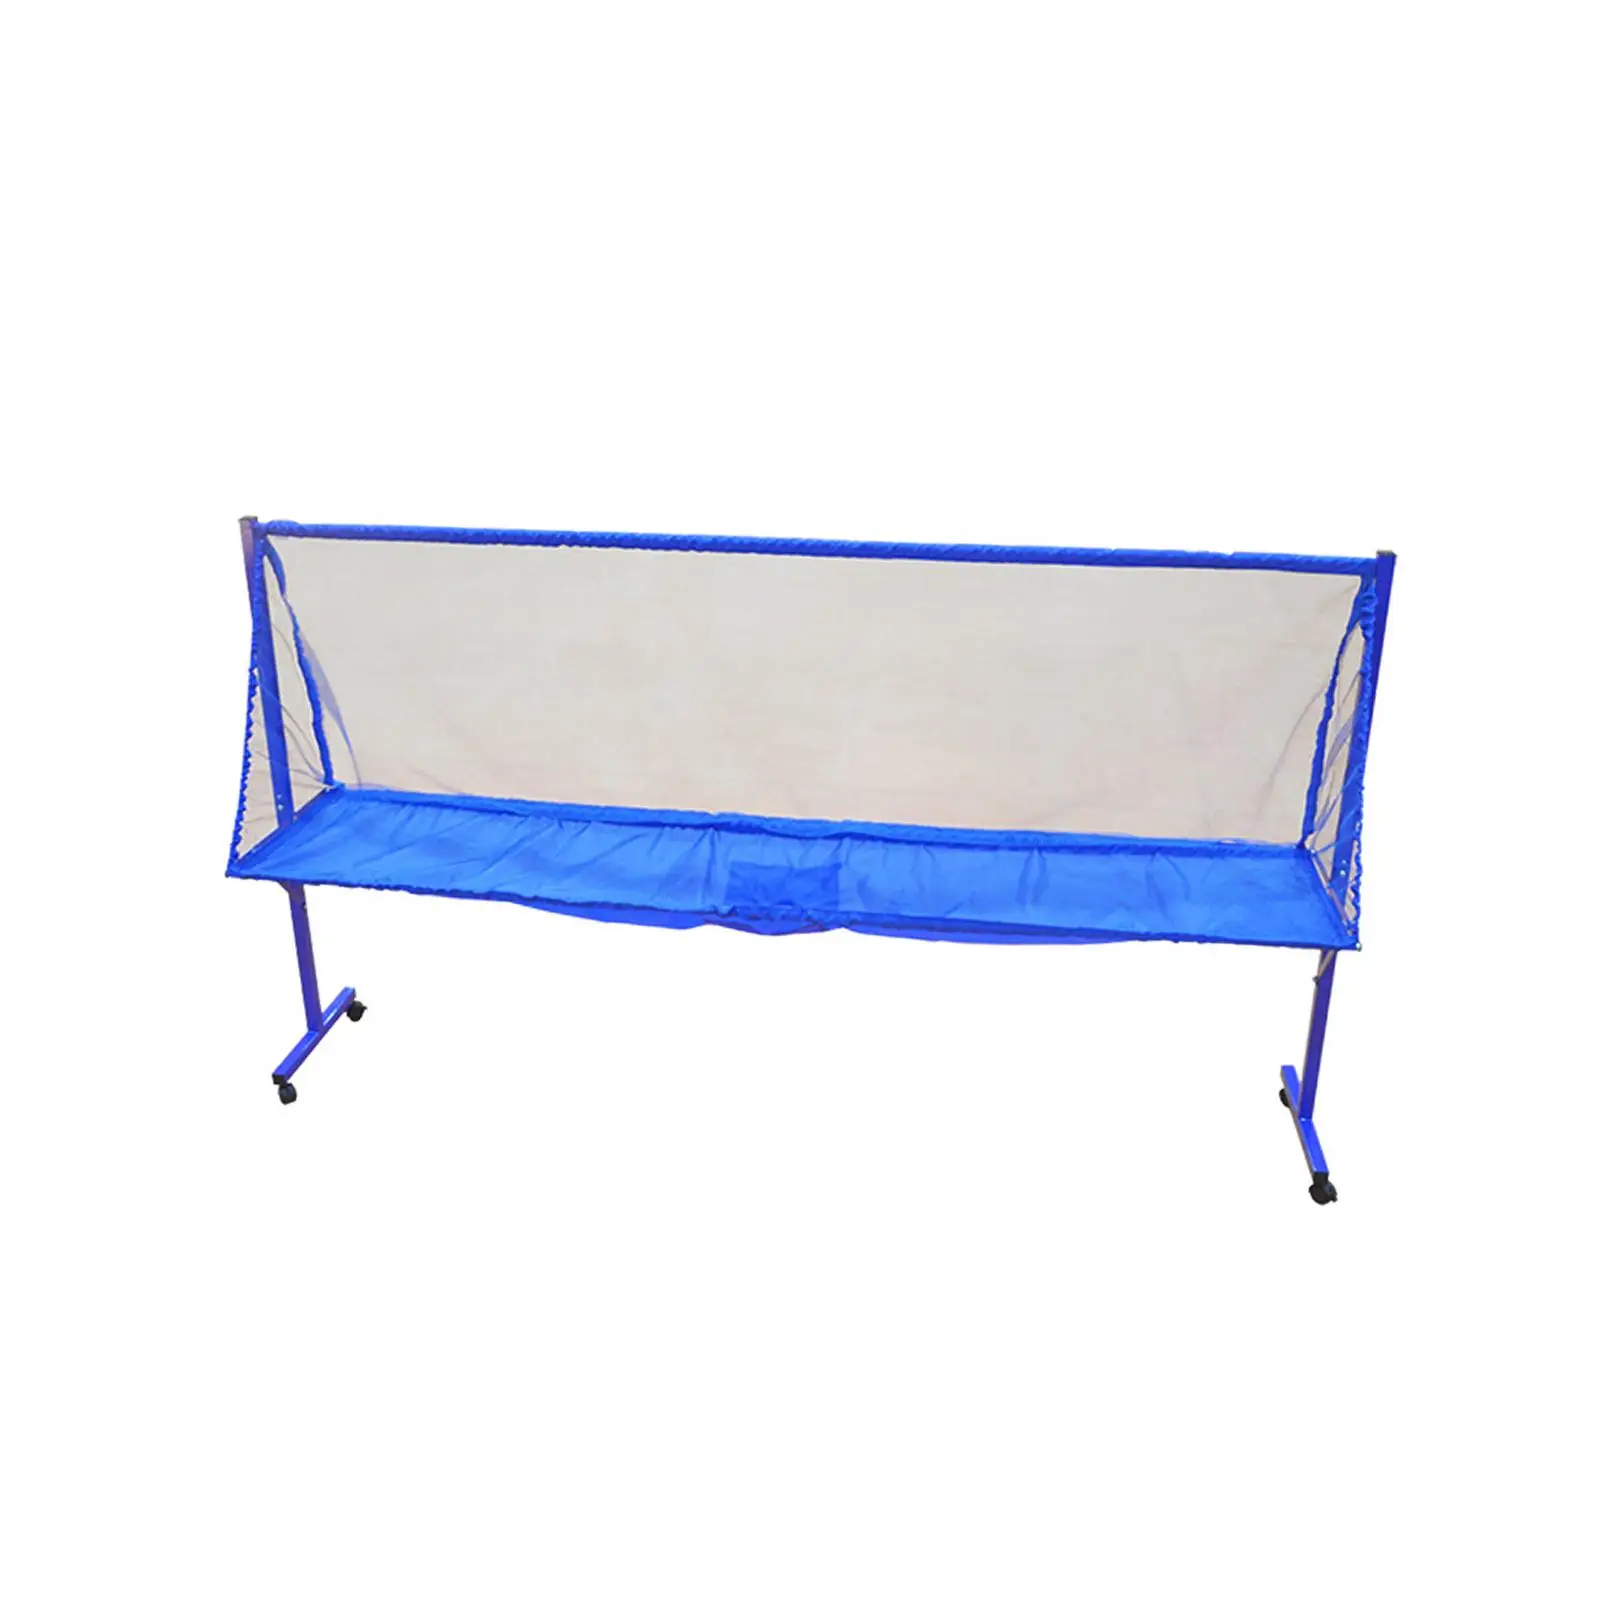 Table Tennis Ball Catch Net Ball Collector Large Ping Pong Recycle Catcher Easy to Assemble for Self Training